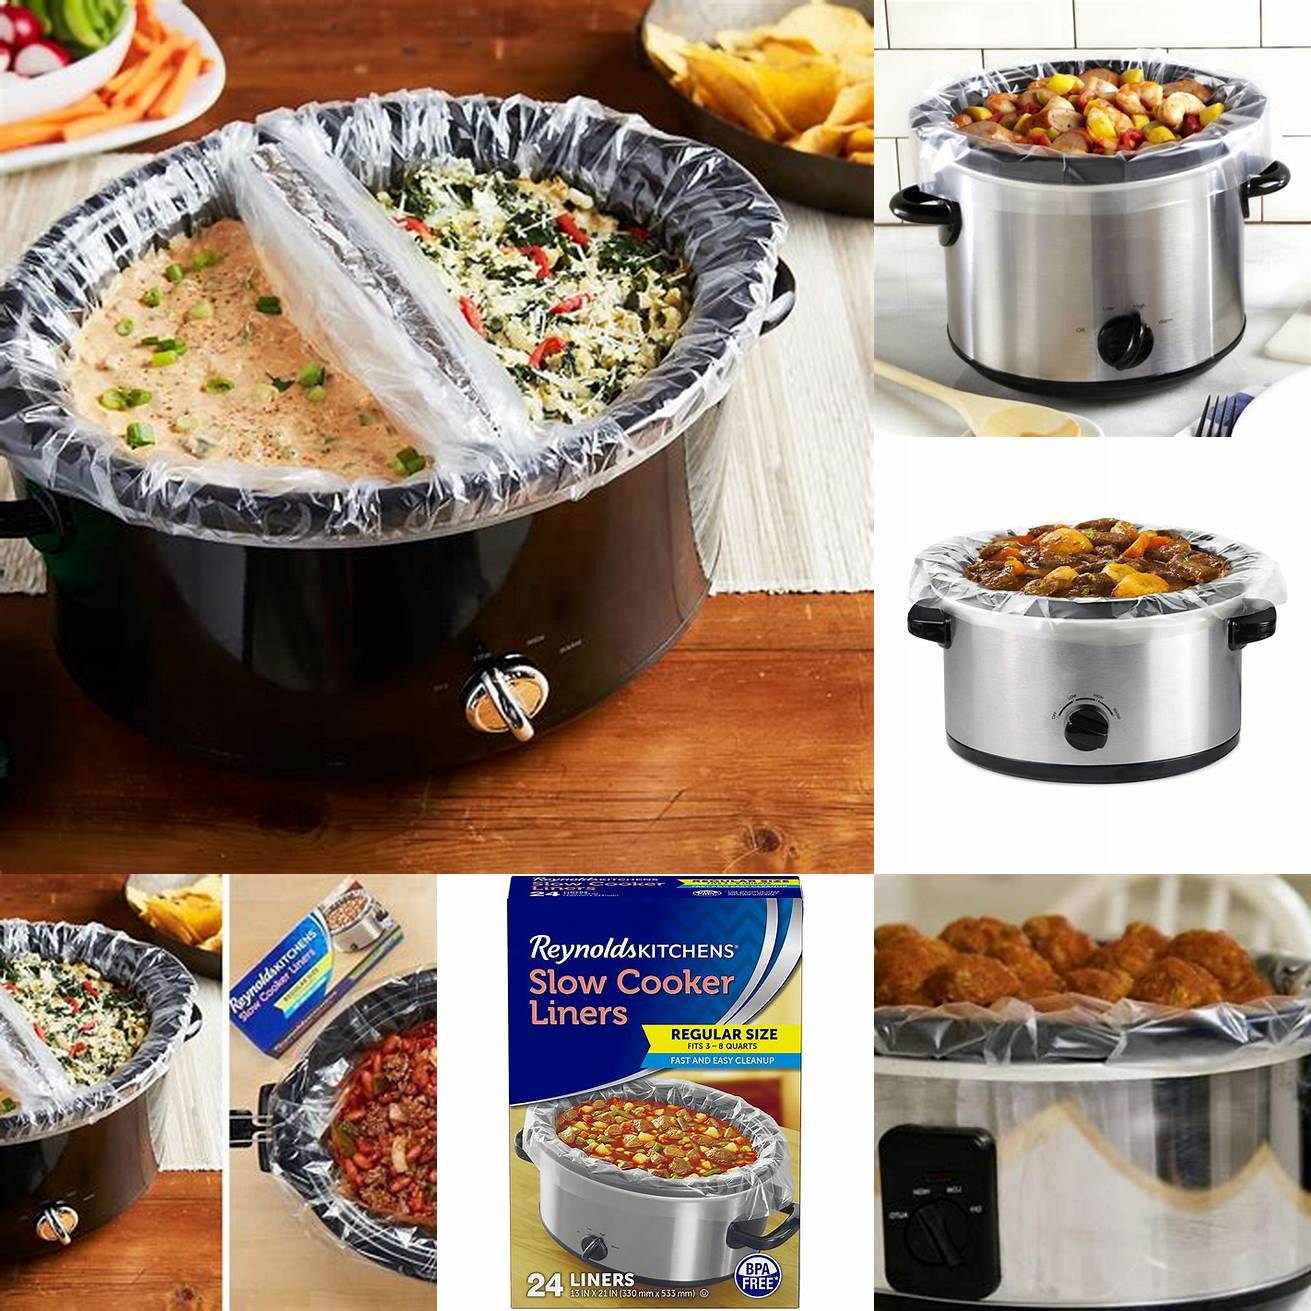 Use a slow cooker liner